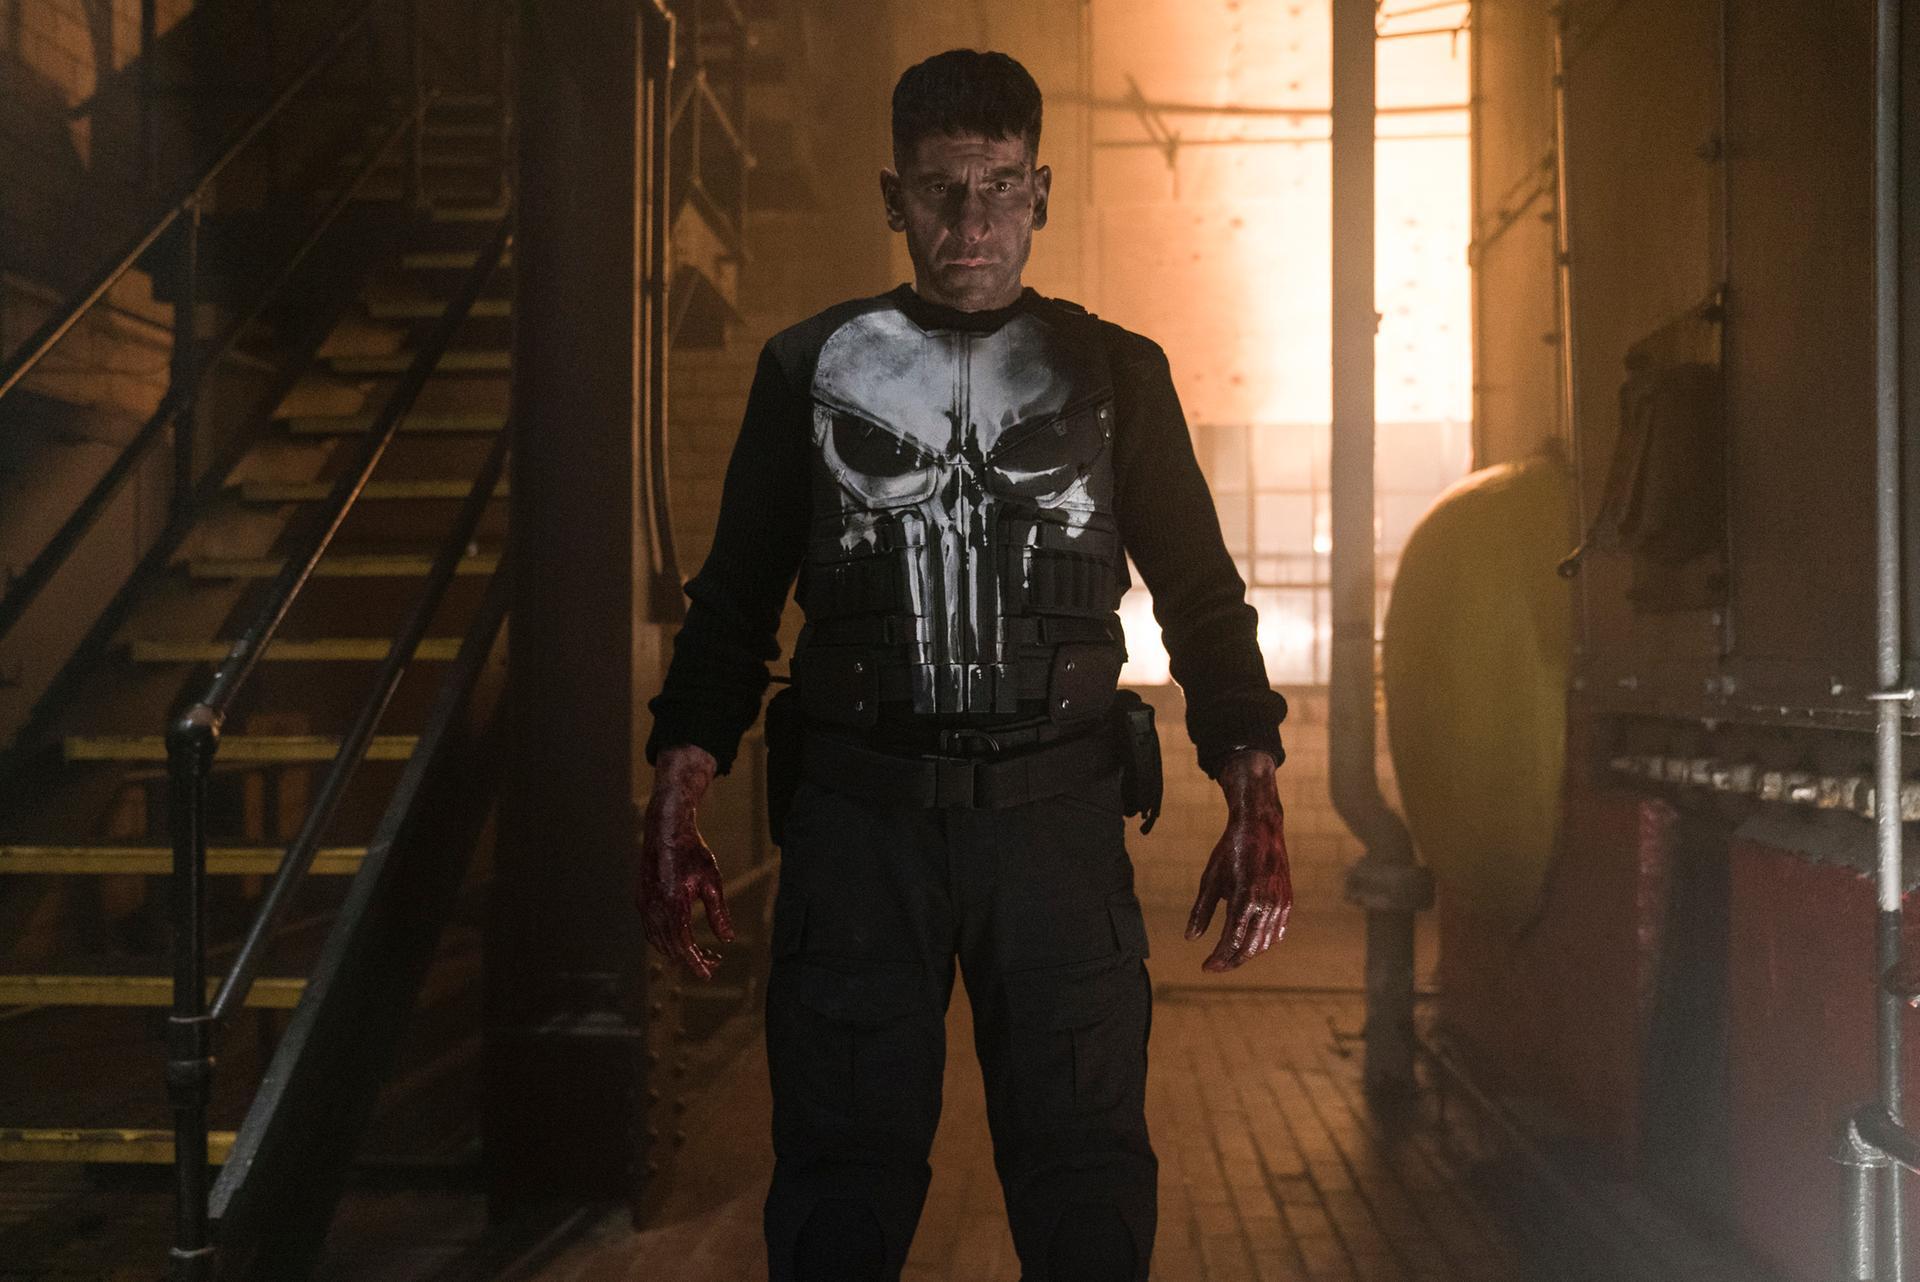 Is it time for Marvel to retire the Punisher? The character's skull logo was  worn by Capitol rioters